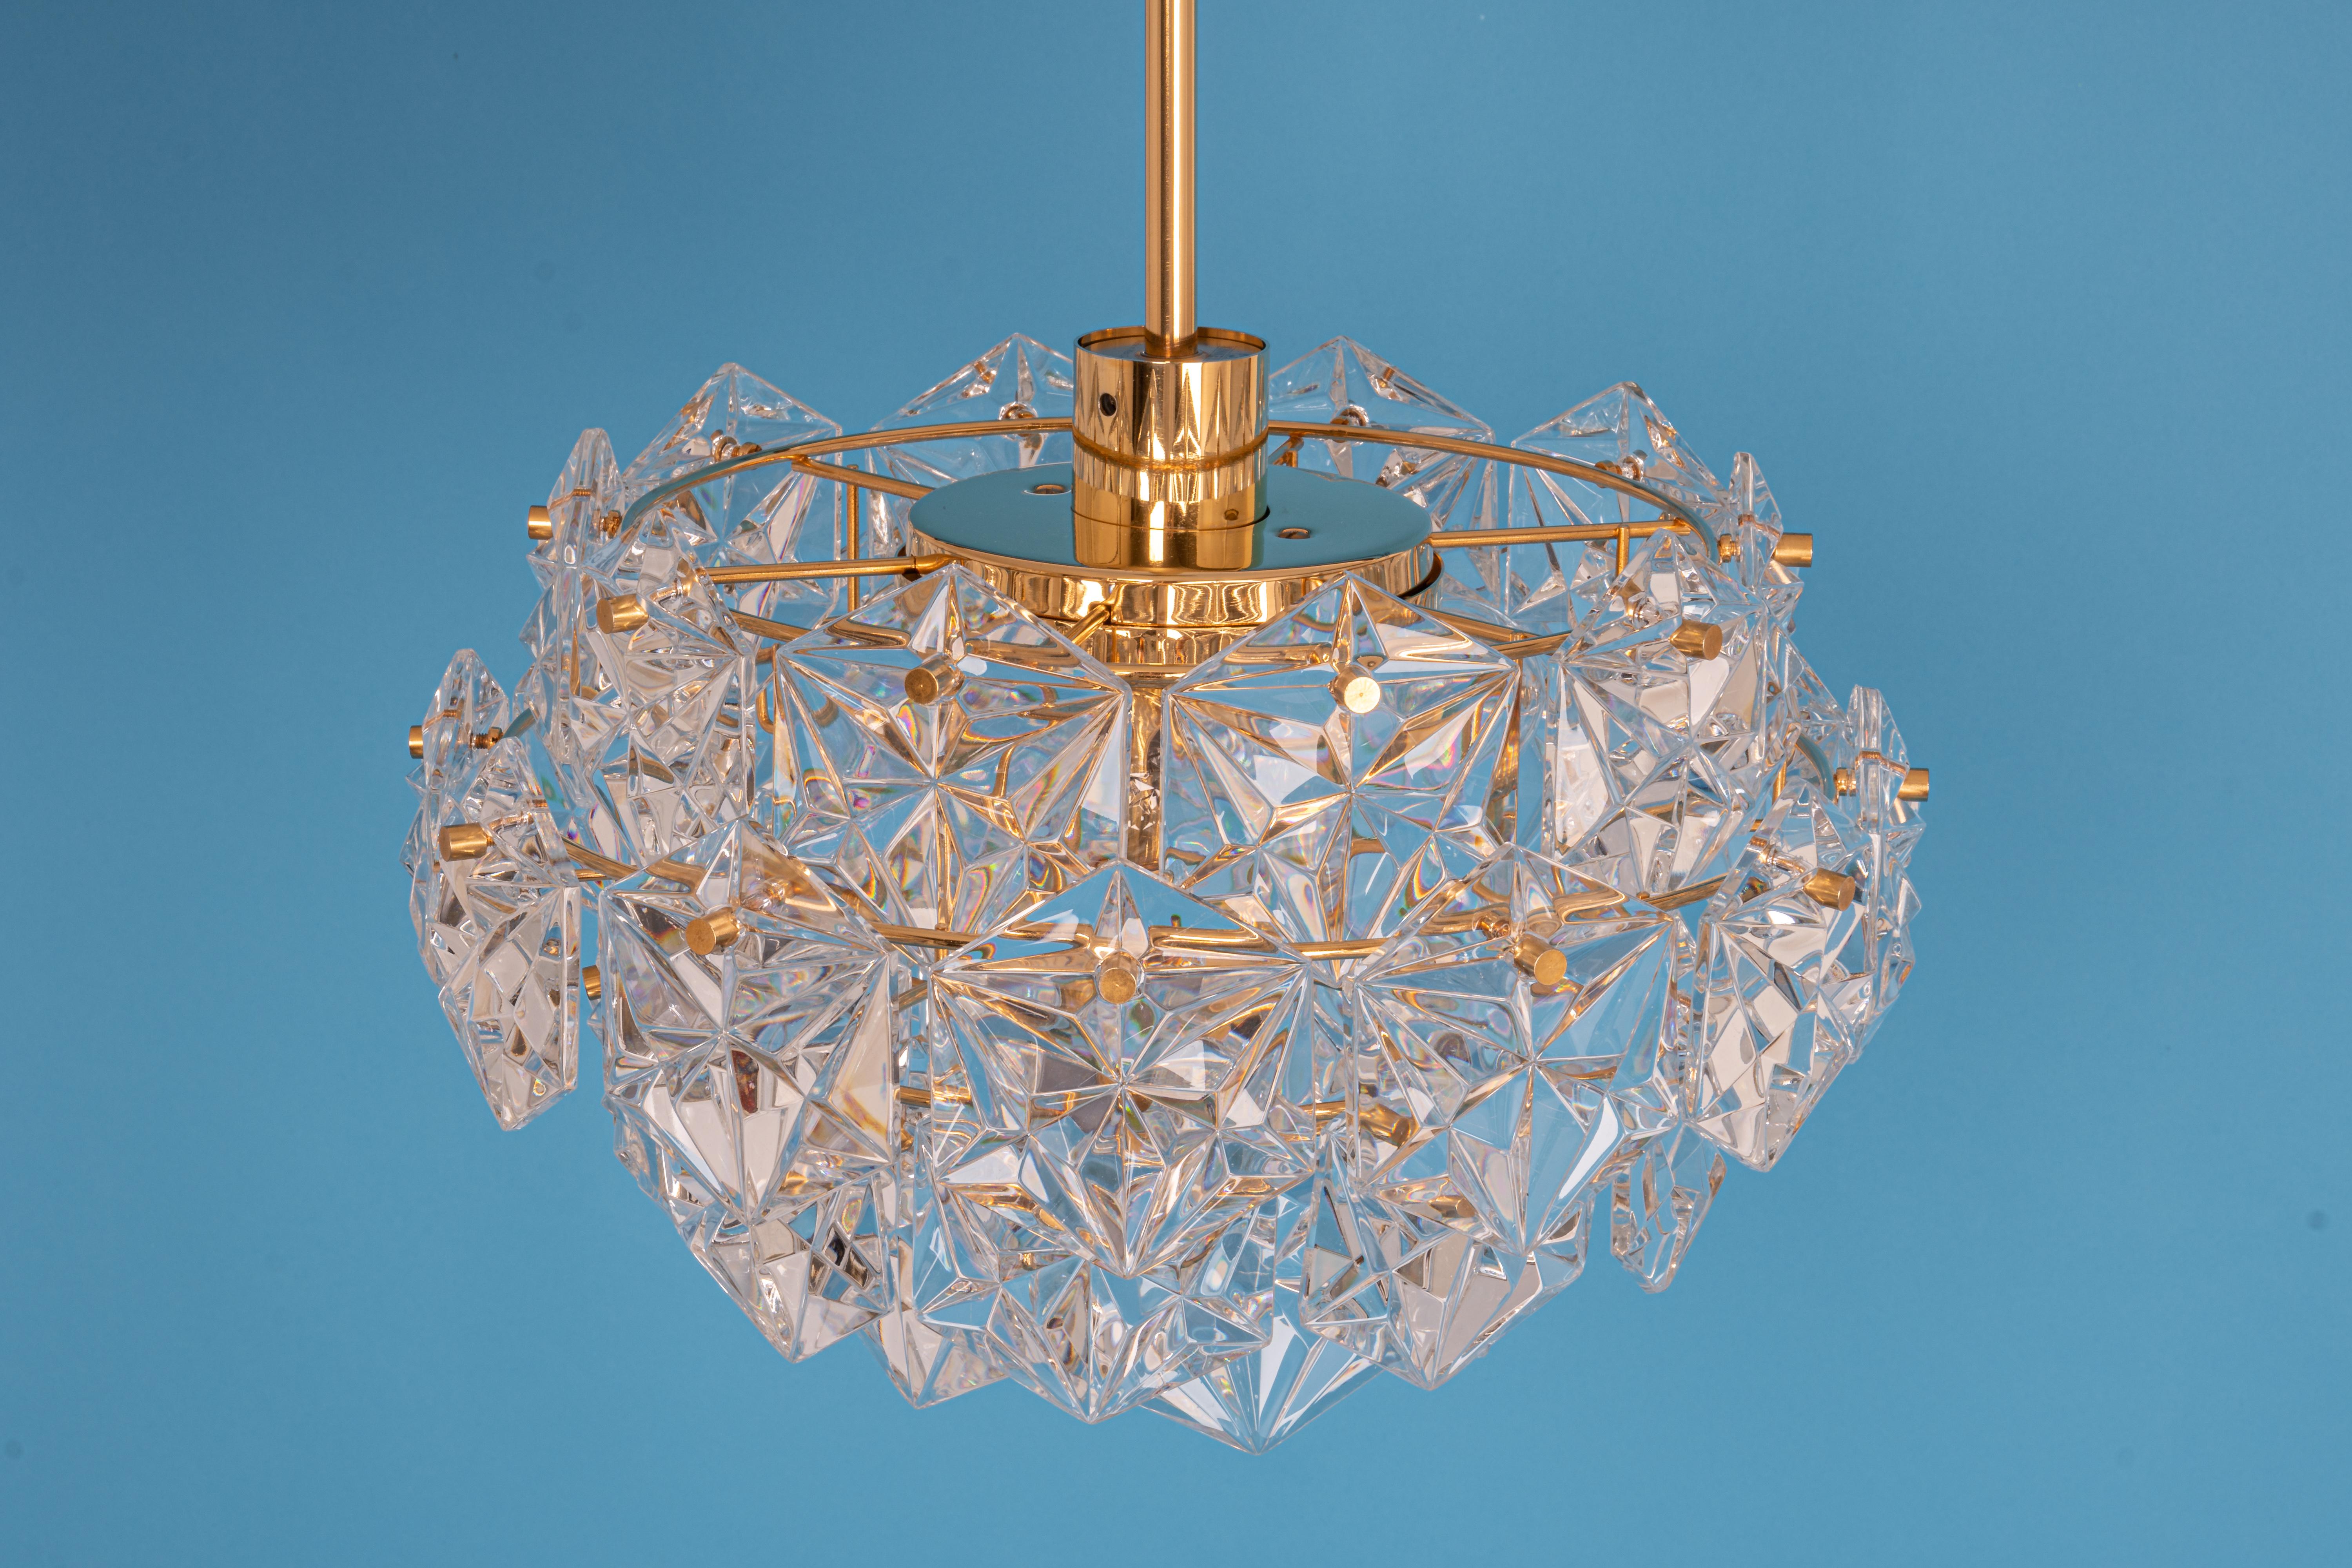 1 of 2 Petite Chandeliers, Brass and Crystal Glass by Kinkeldey, Germany, 1970s For Sale 10